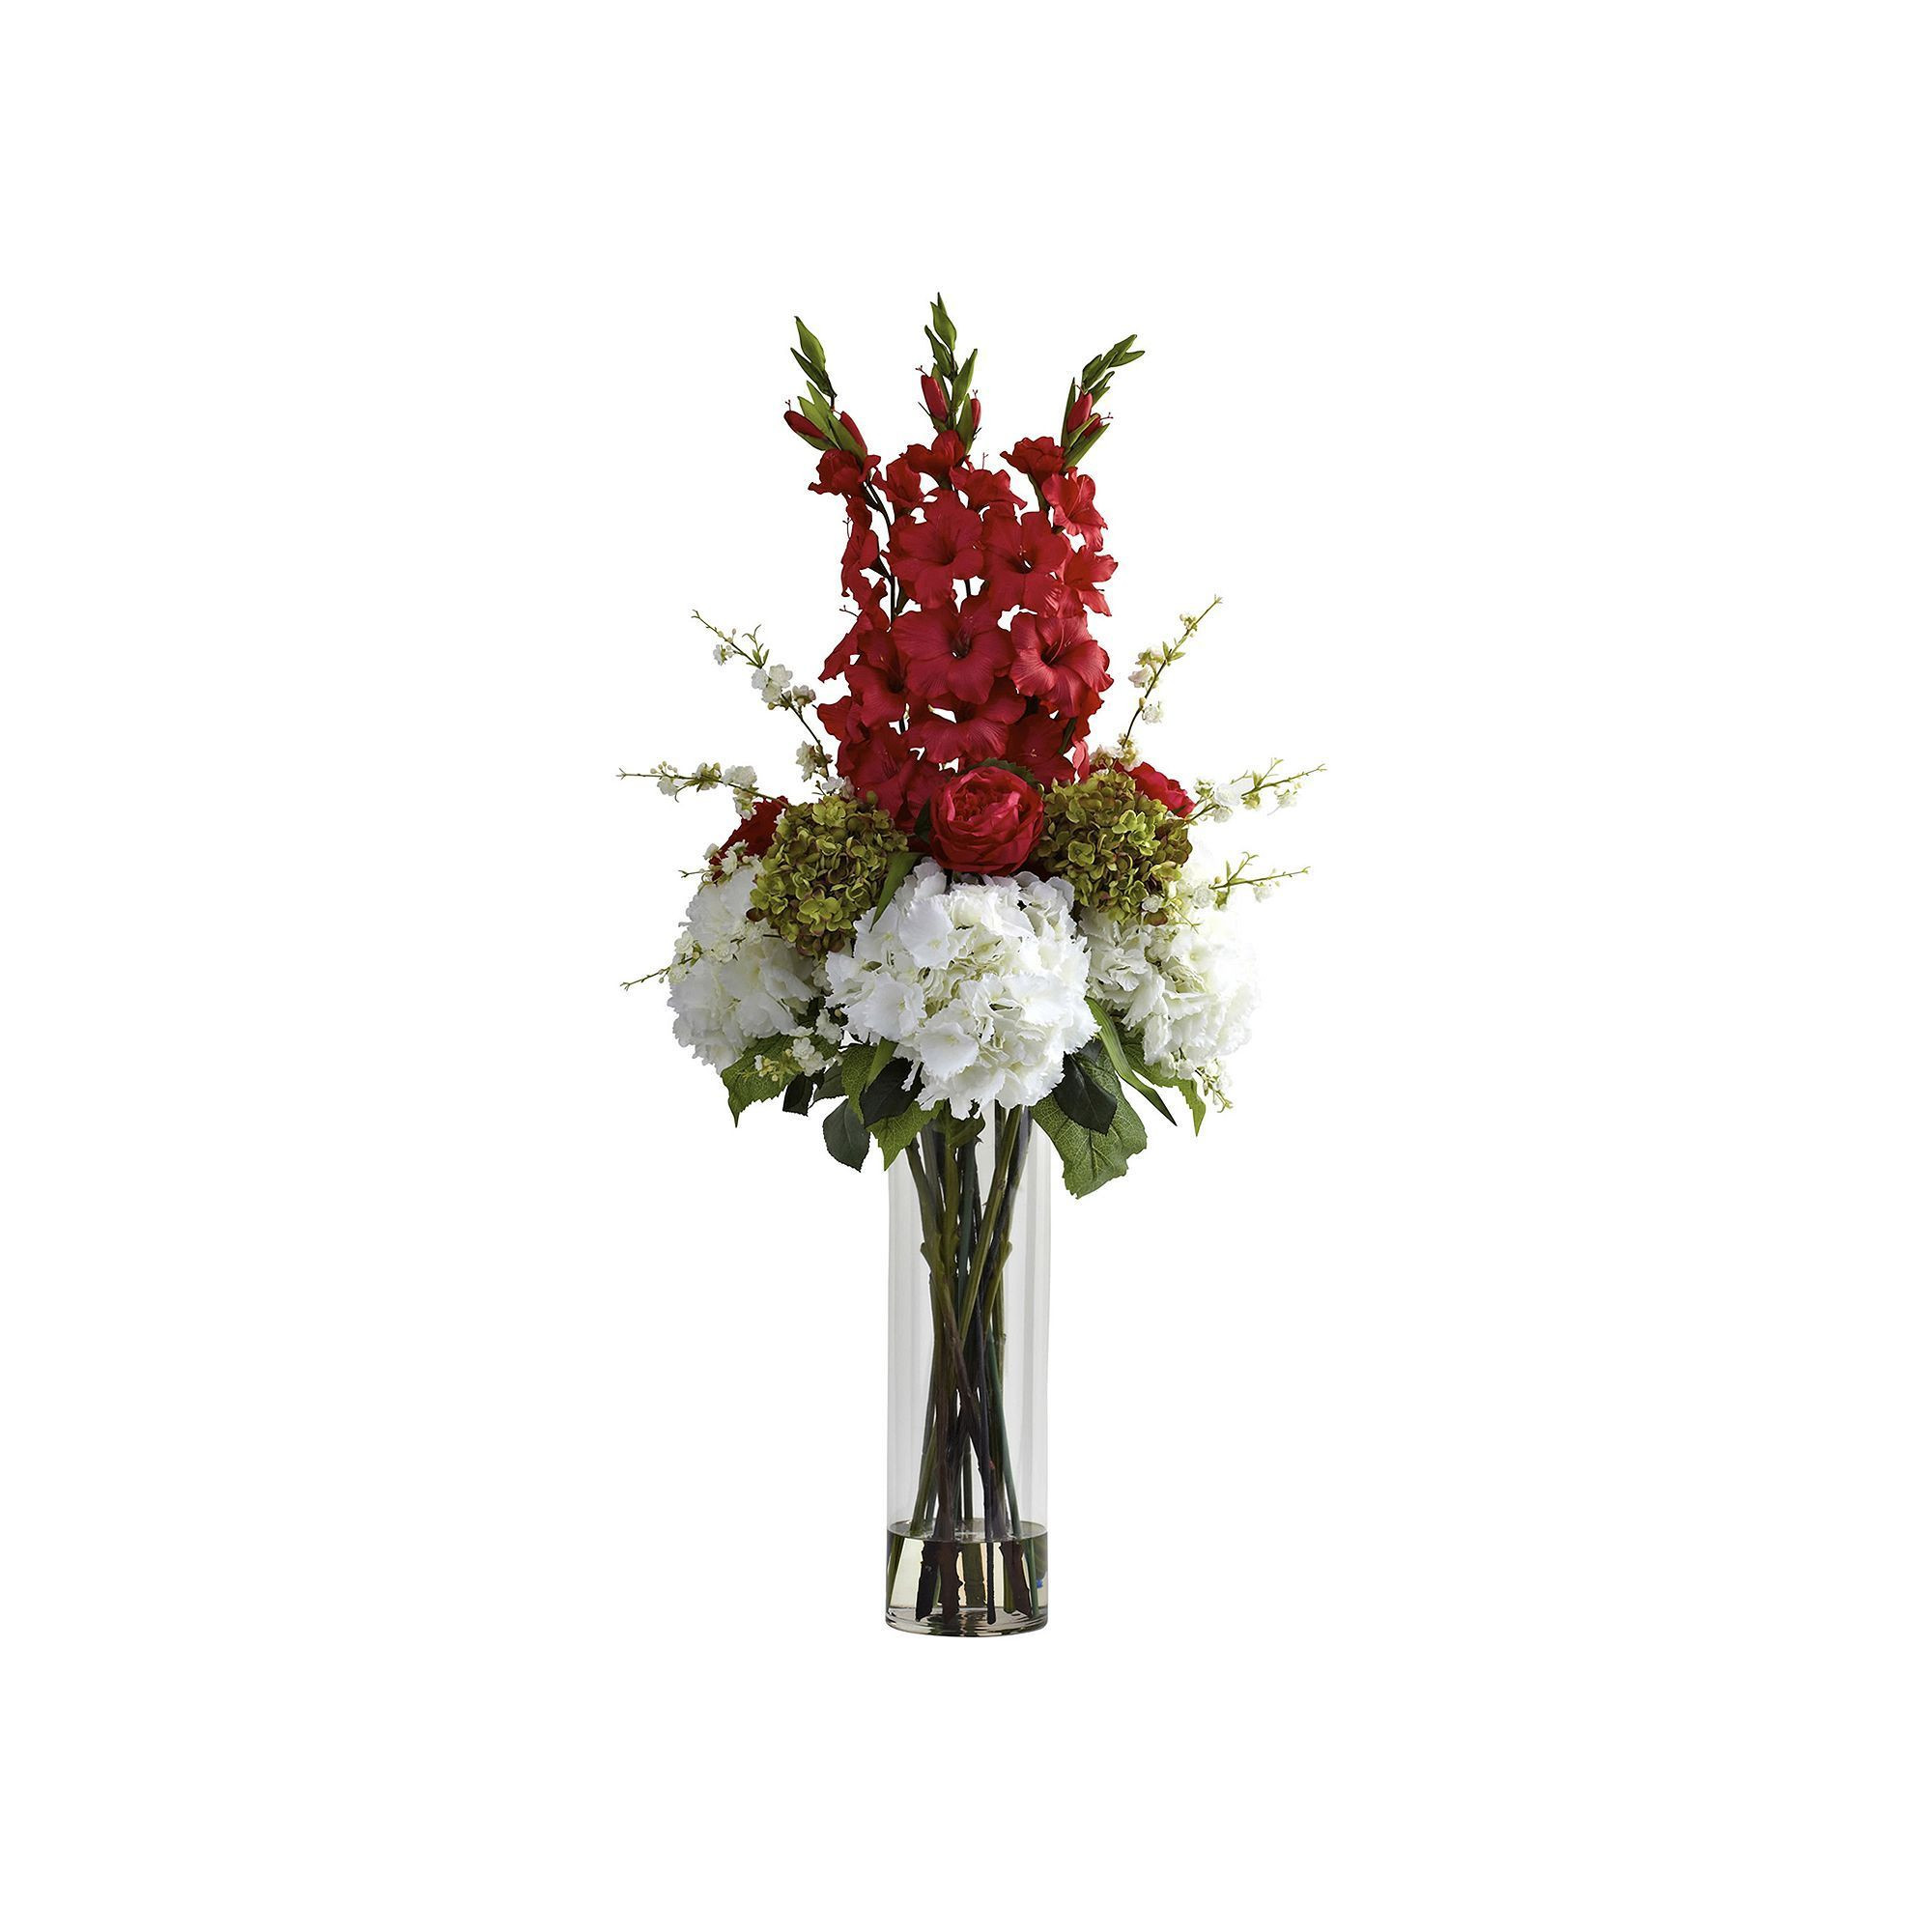 17 Ideal Ftd Cross Vase 2022 free download ftd cross vase of pikby social media analytics statistics tools inside nearly natural nearly natural giant mixed floral arrangement